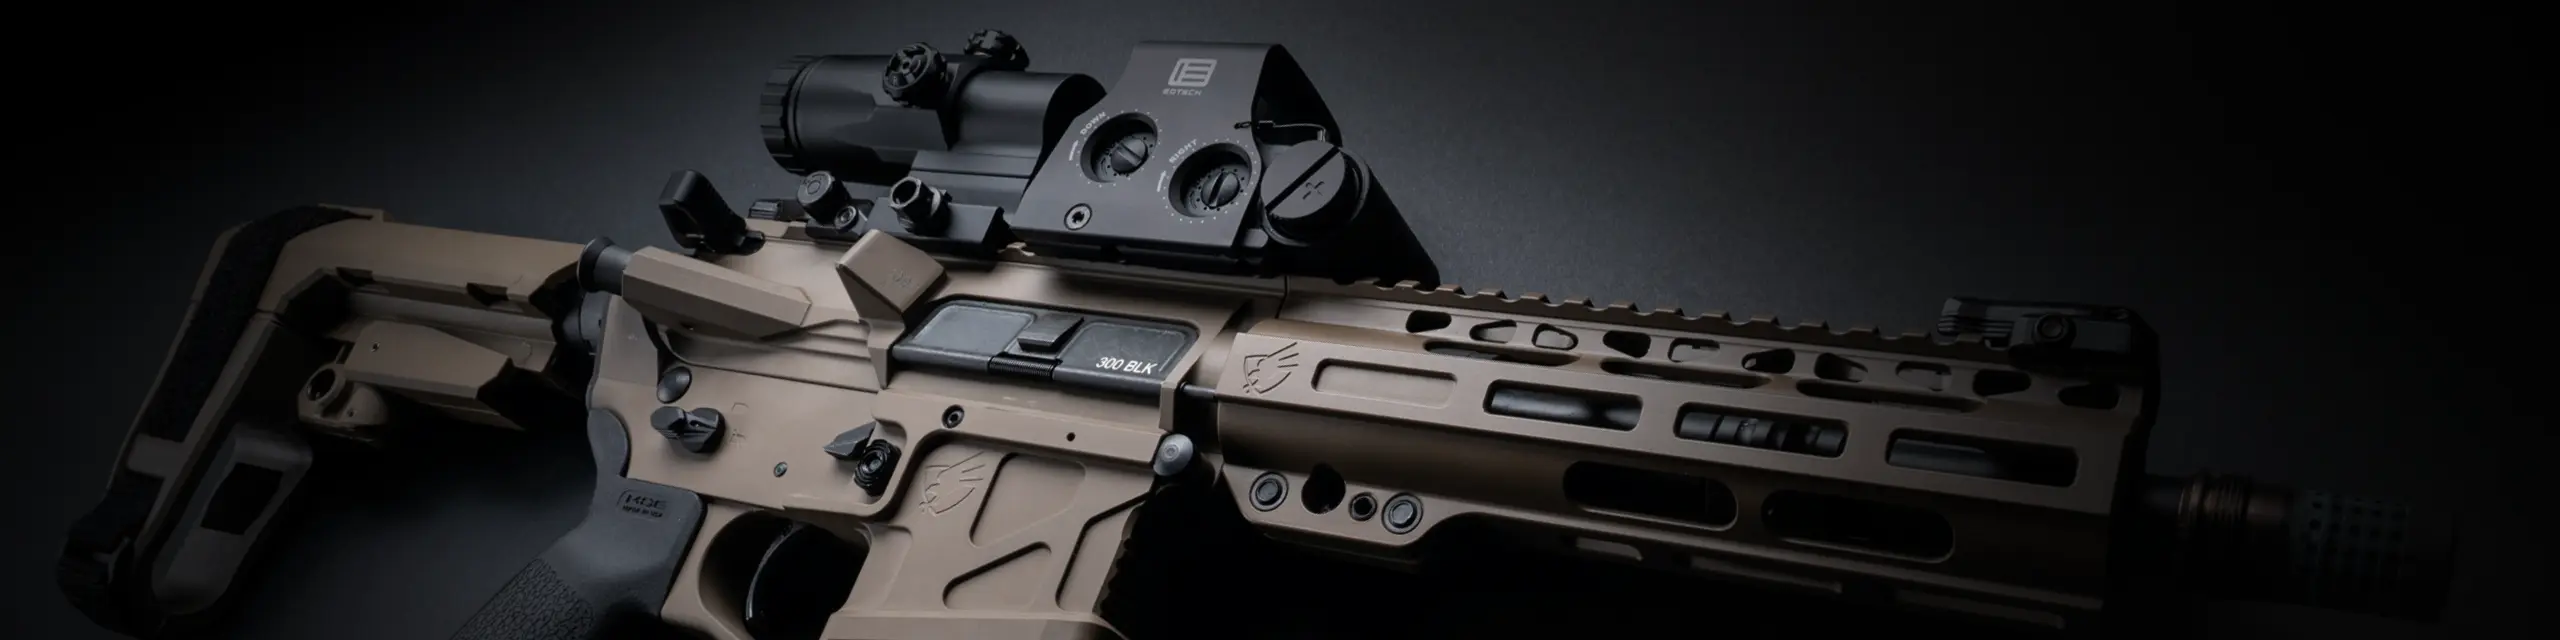 Eotech Optic and American Defense Rifle